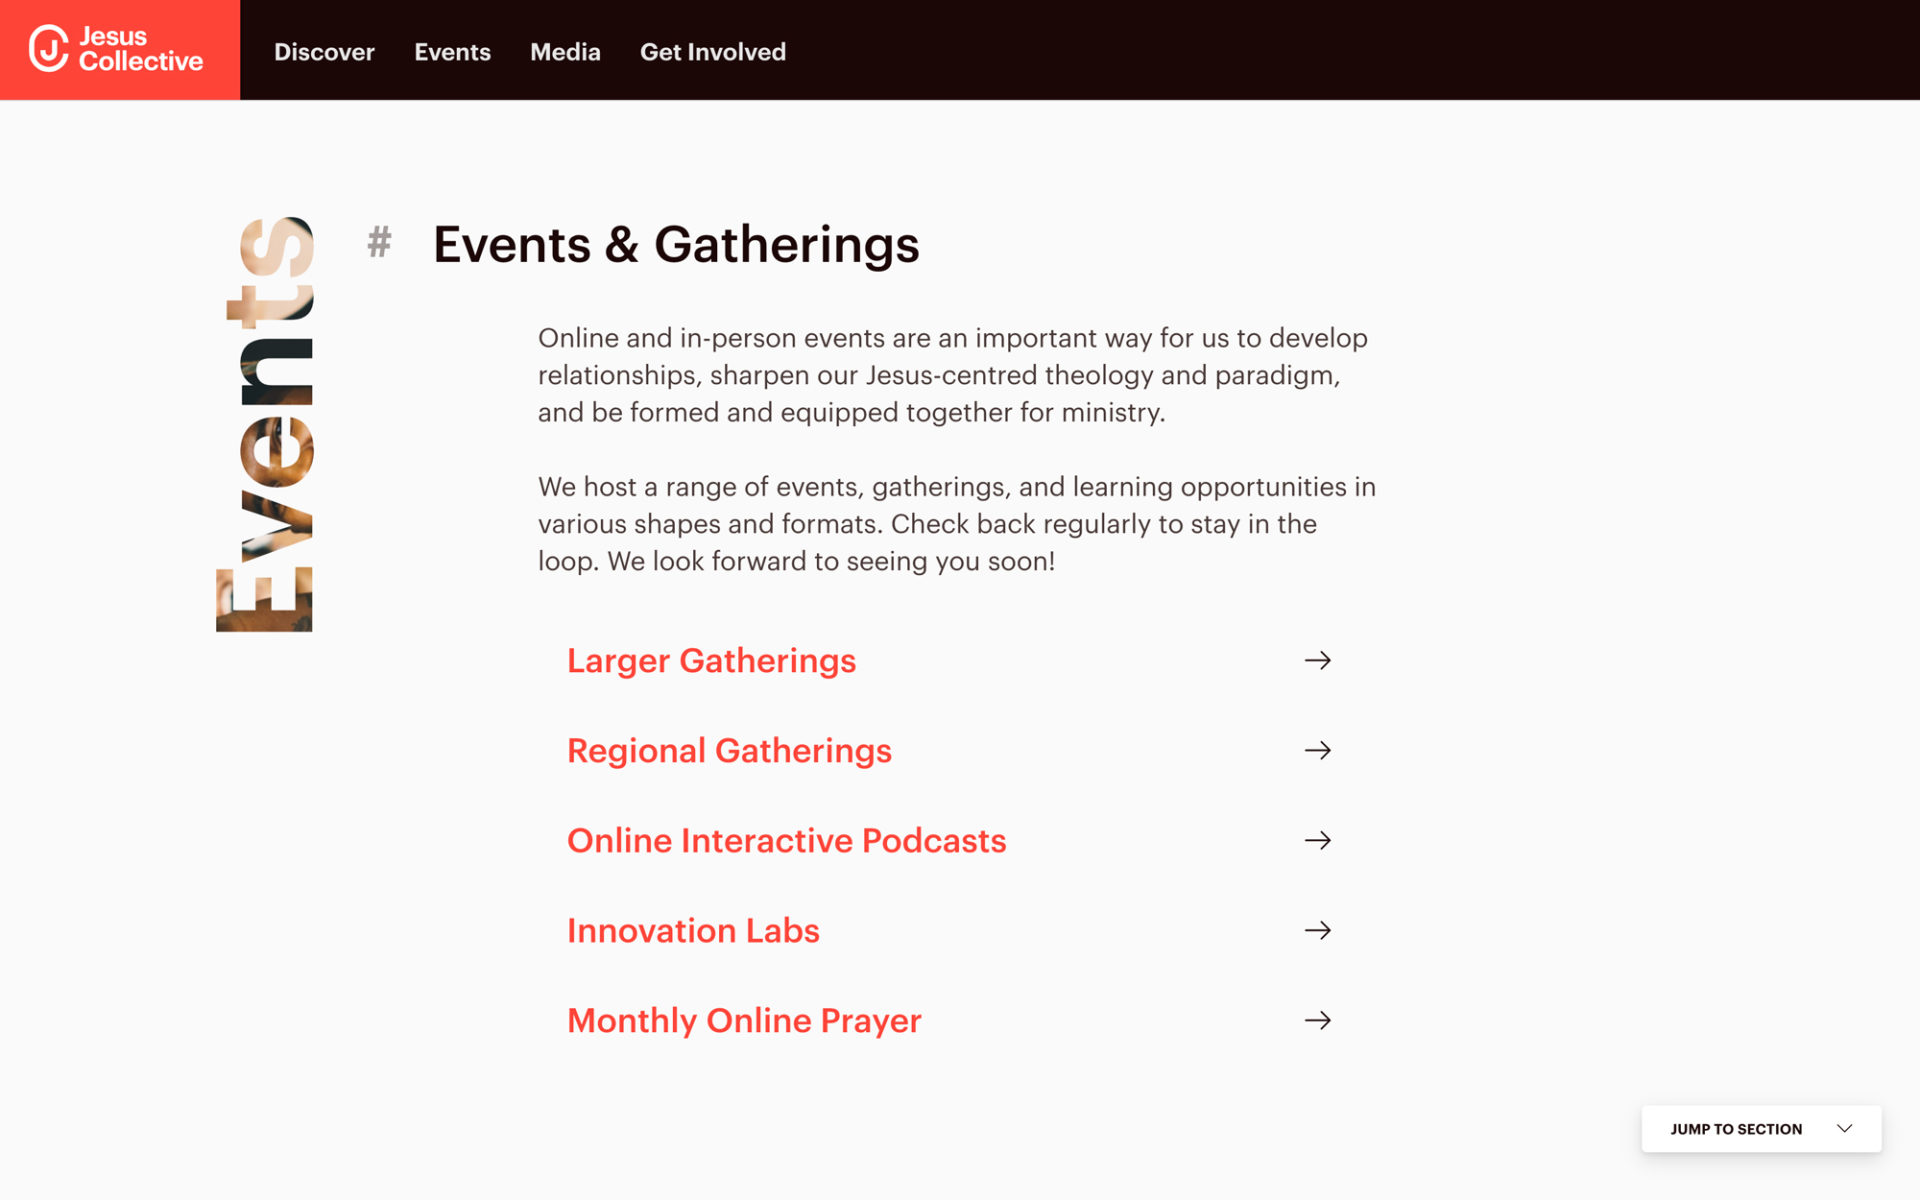 A section dedicated to events on the Jesus Collective site